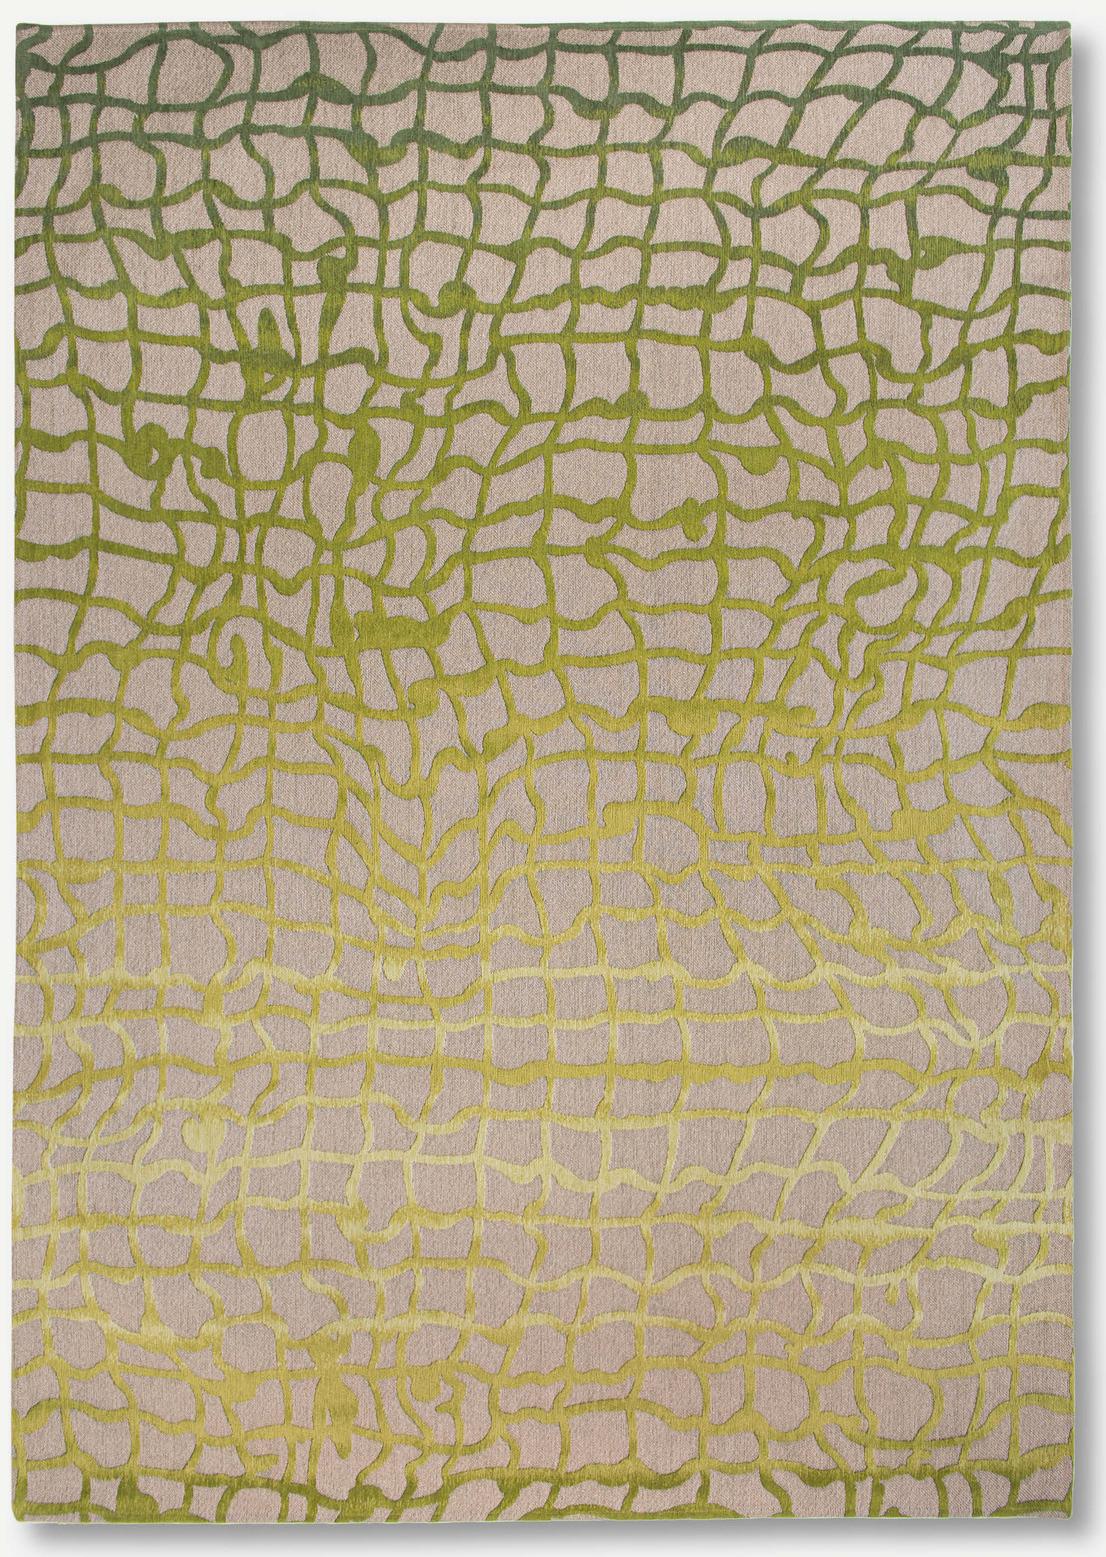 Green Flatwoven Rug ☞ Size: 2' 7" x 5' (80 x 150 cm)